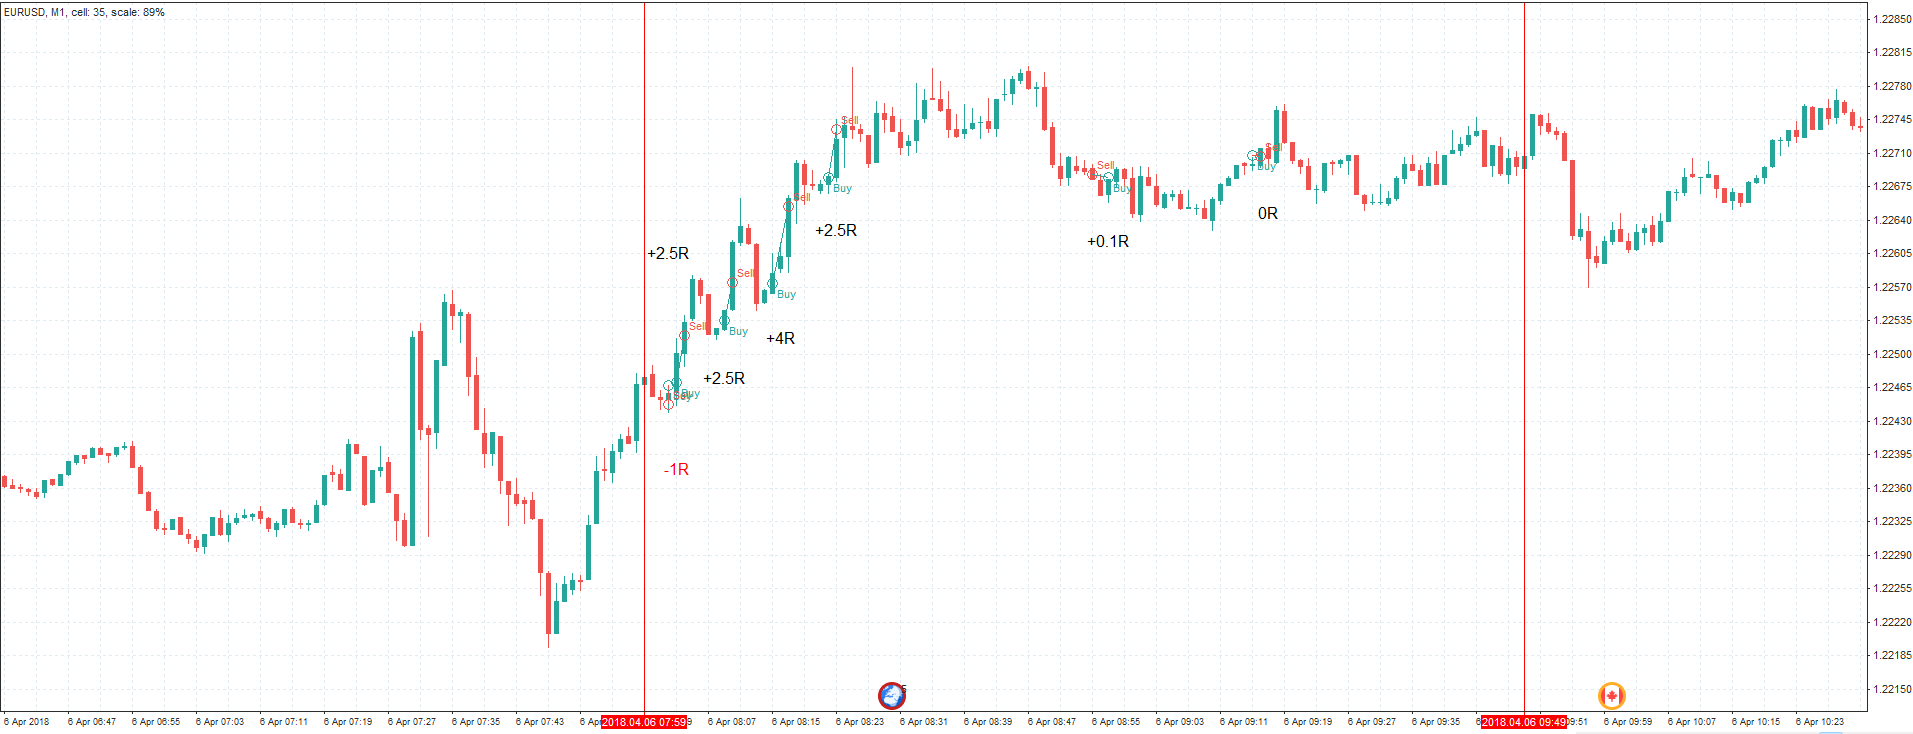 EURUSD practice day trading session in Forex Tester 5